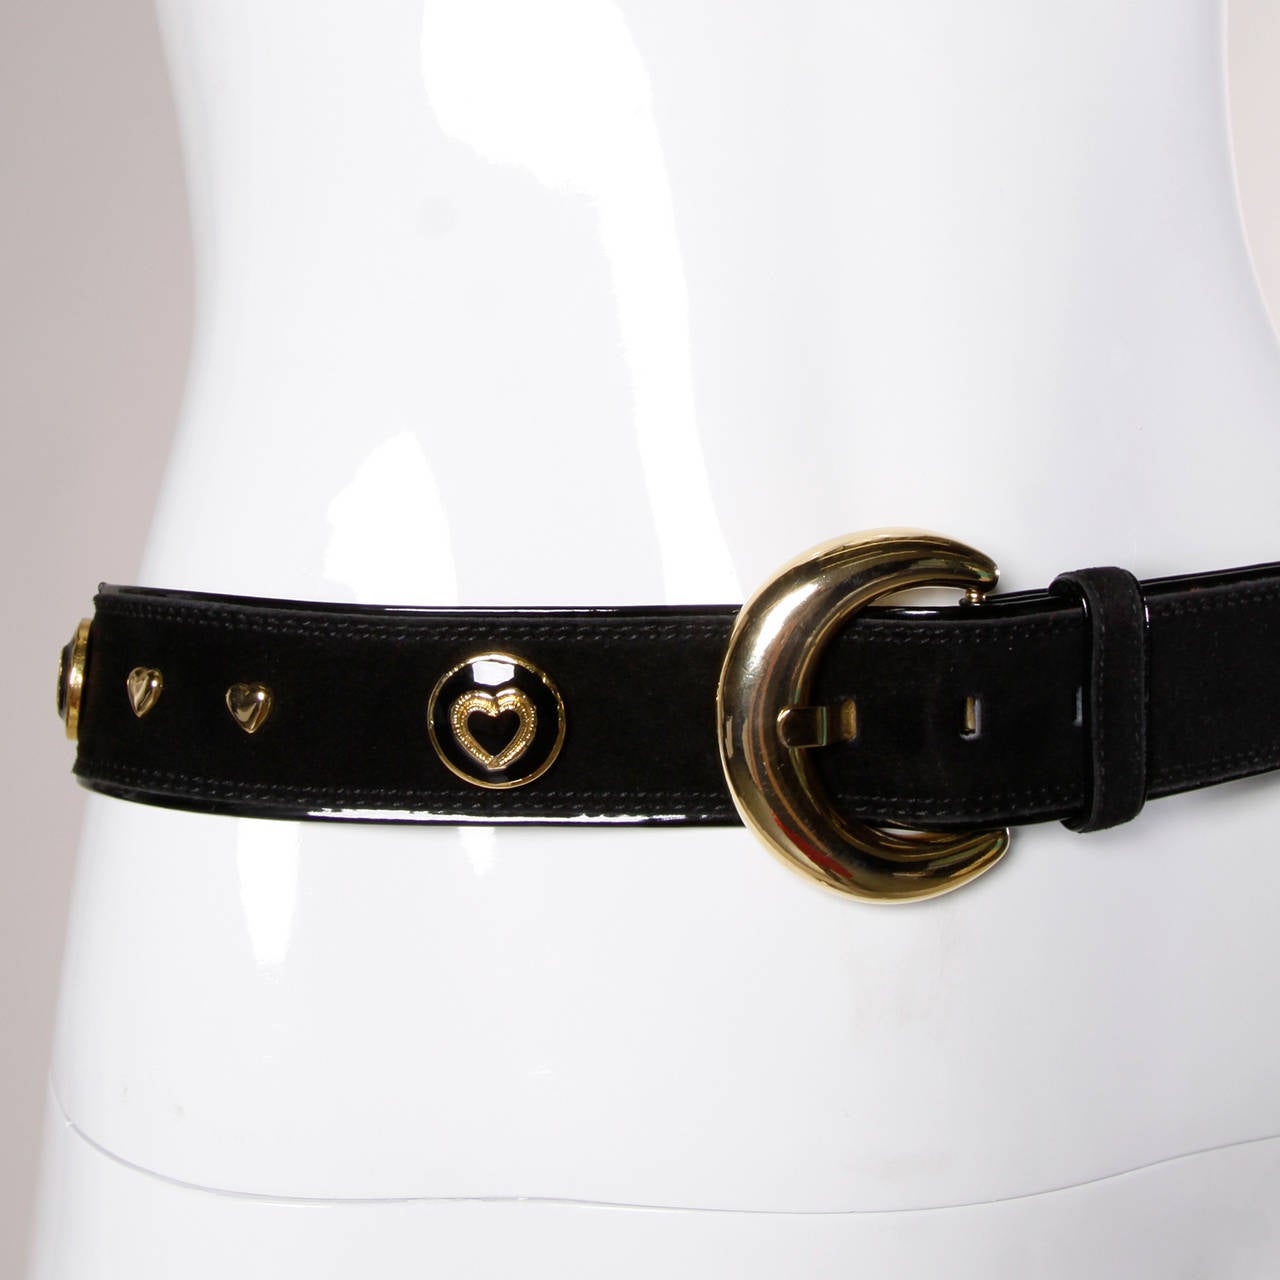 Vintage black leather belt with goldtone and enamel hearts by Escada.

Details:

Fully Lined
Front Buckle Closure
Marked Size: 40
Color: Black/ Black Gloss/ Gold
Fabric: Suede/ Leather
Label: Escada

Measurements:

Waist: